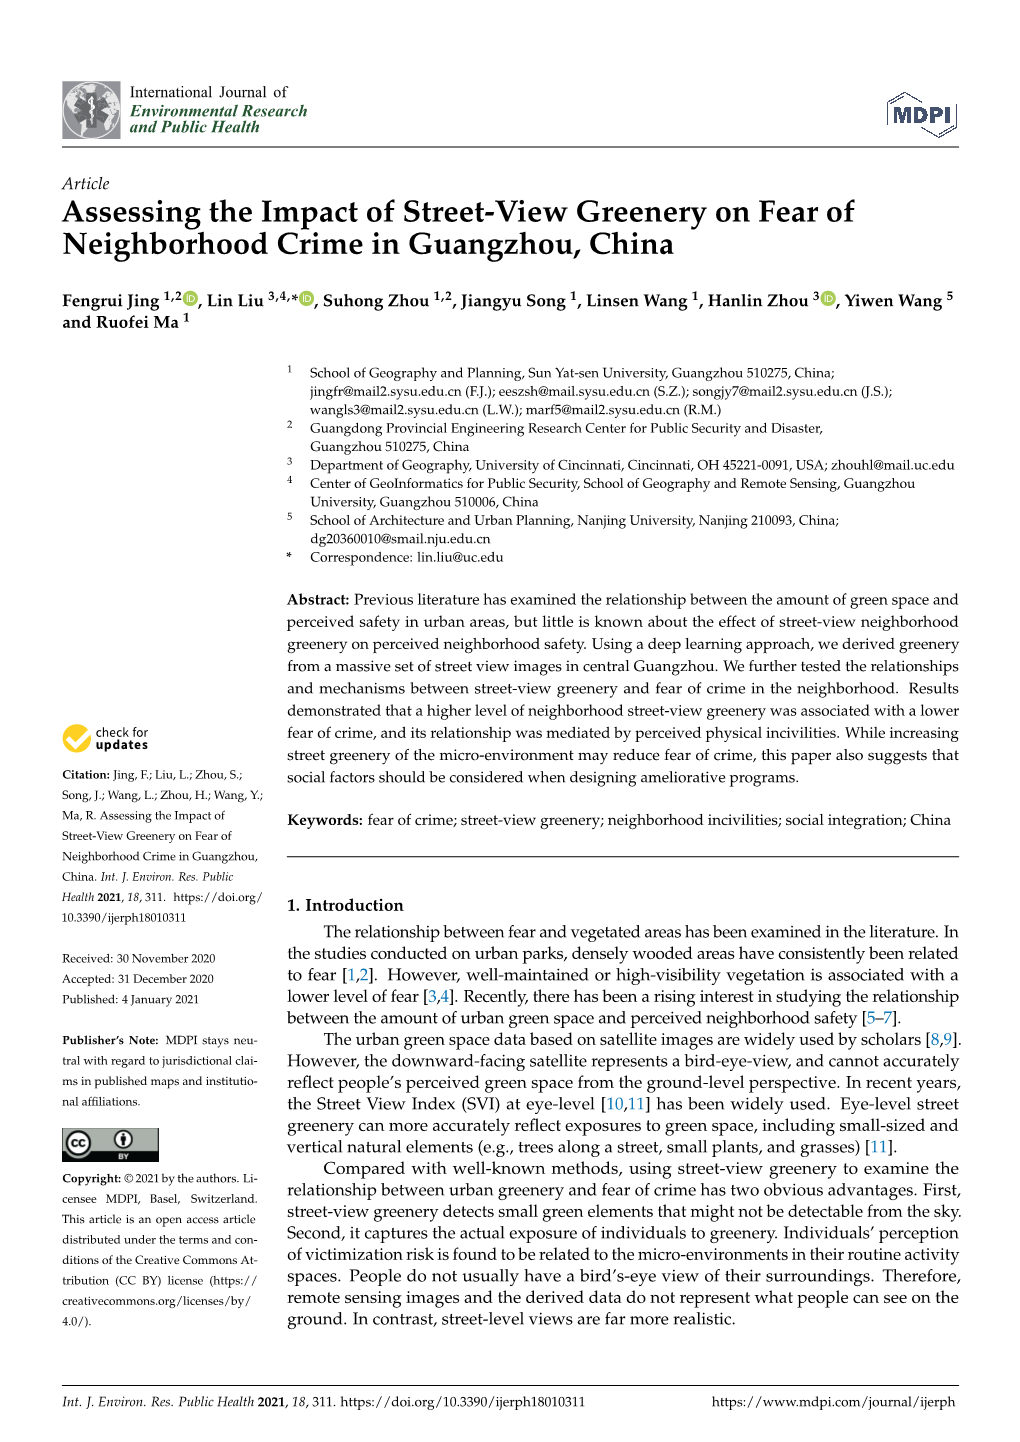 Assessing the Impact of Street-View Greenery on Fear of Neighborhood Crime in Guangzhou, China